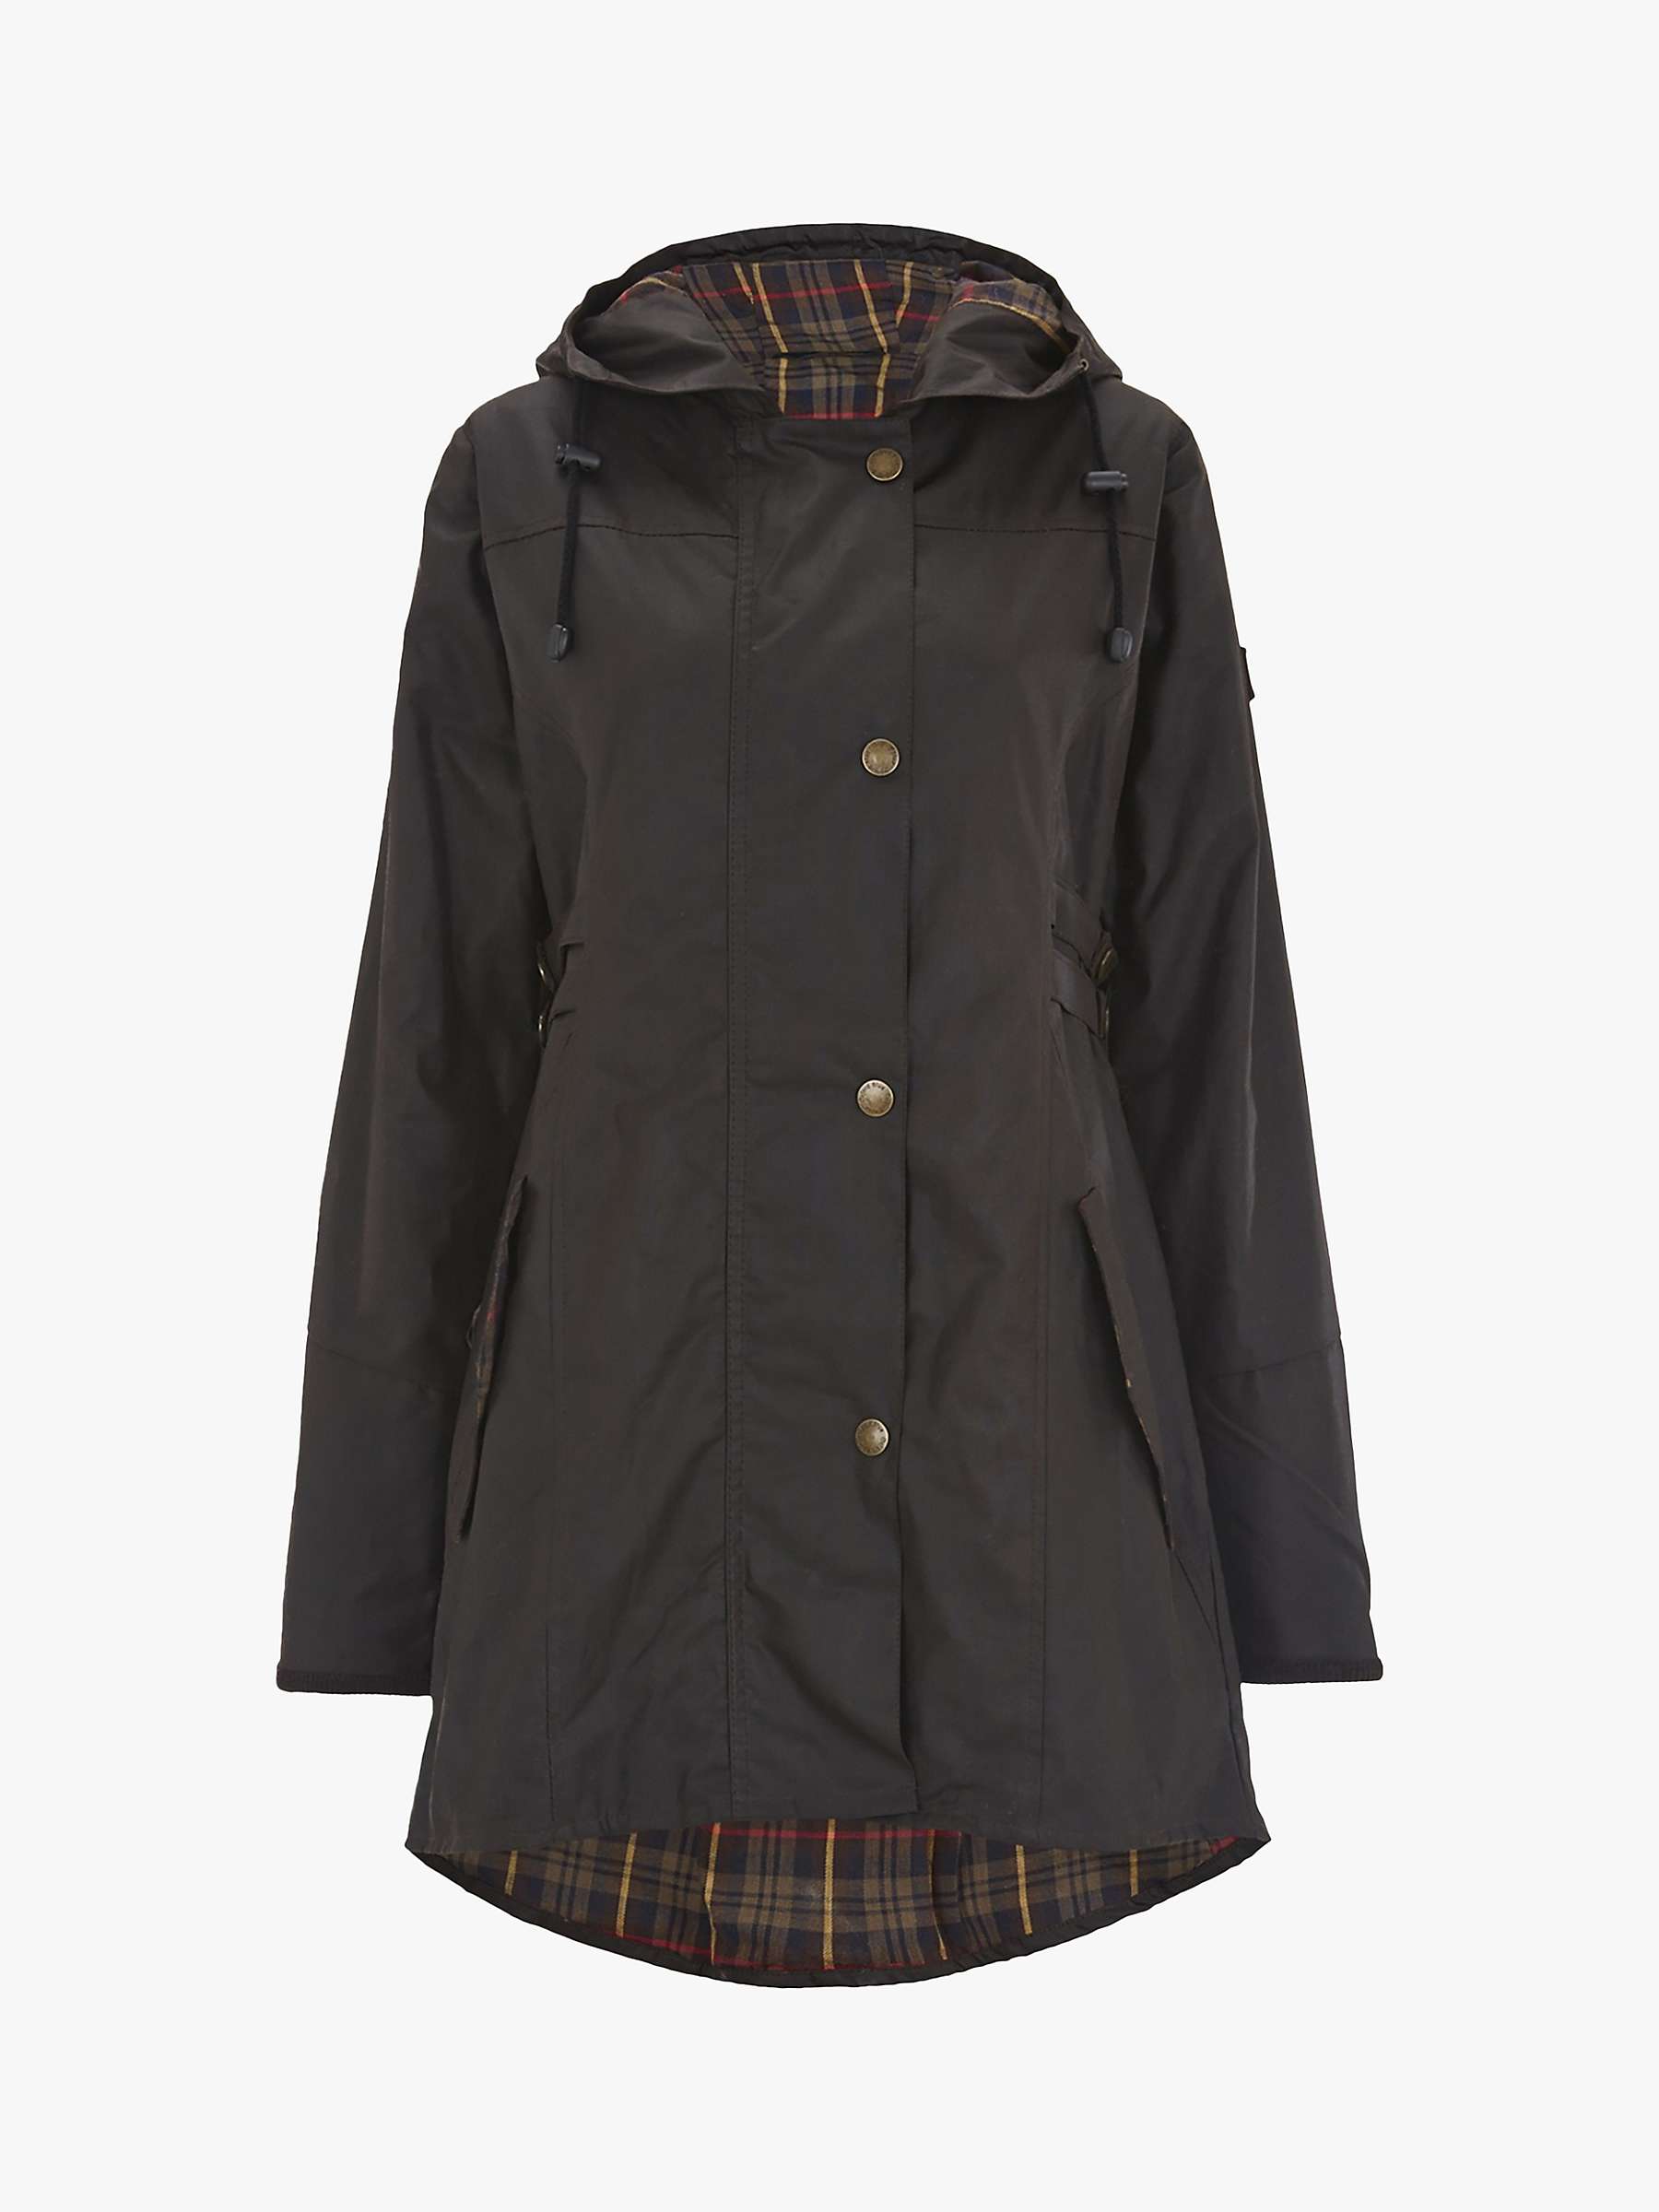 Buy Celtic & Co. Waxed Cotton Riding Coat, Dark Brown Online at johnlewis.com